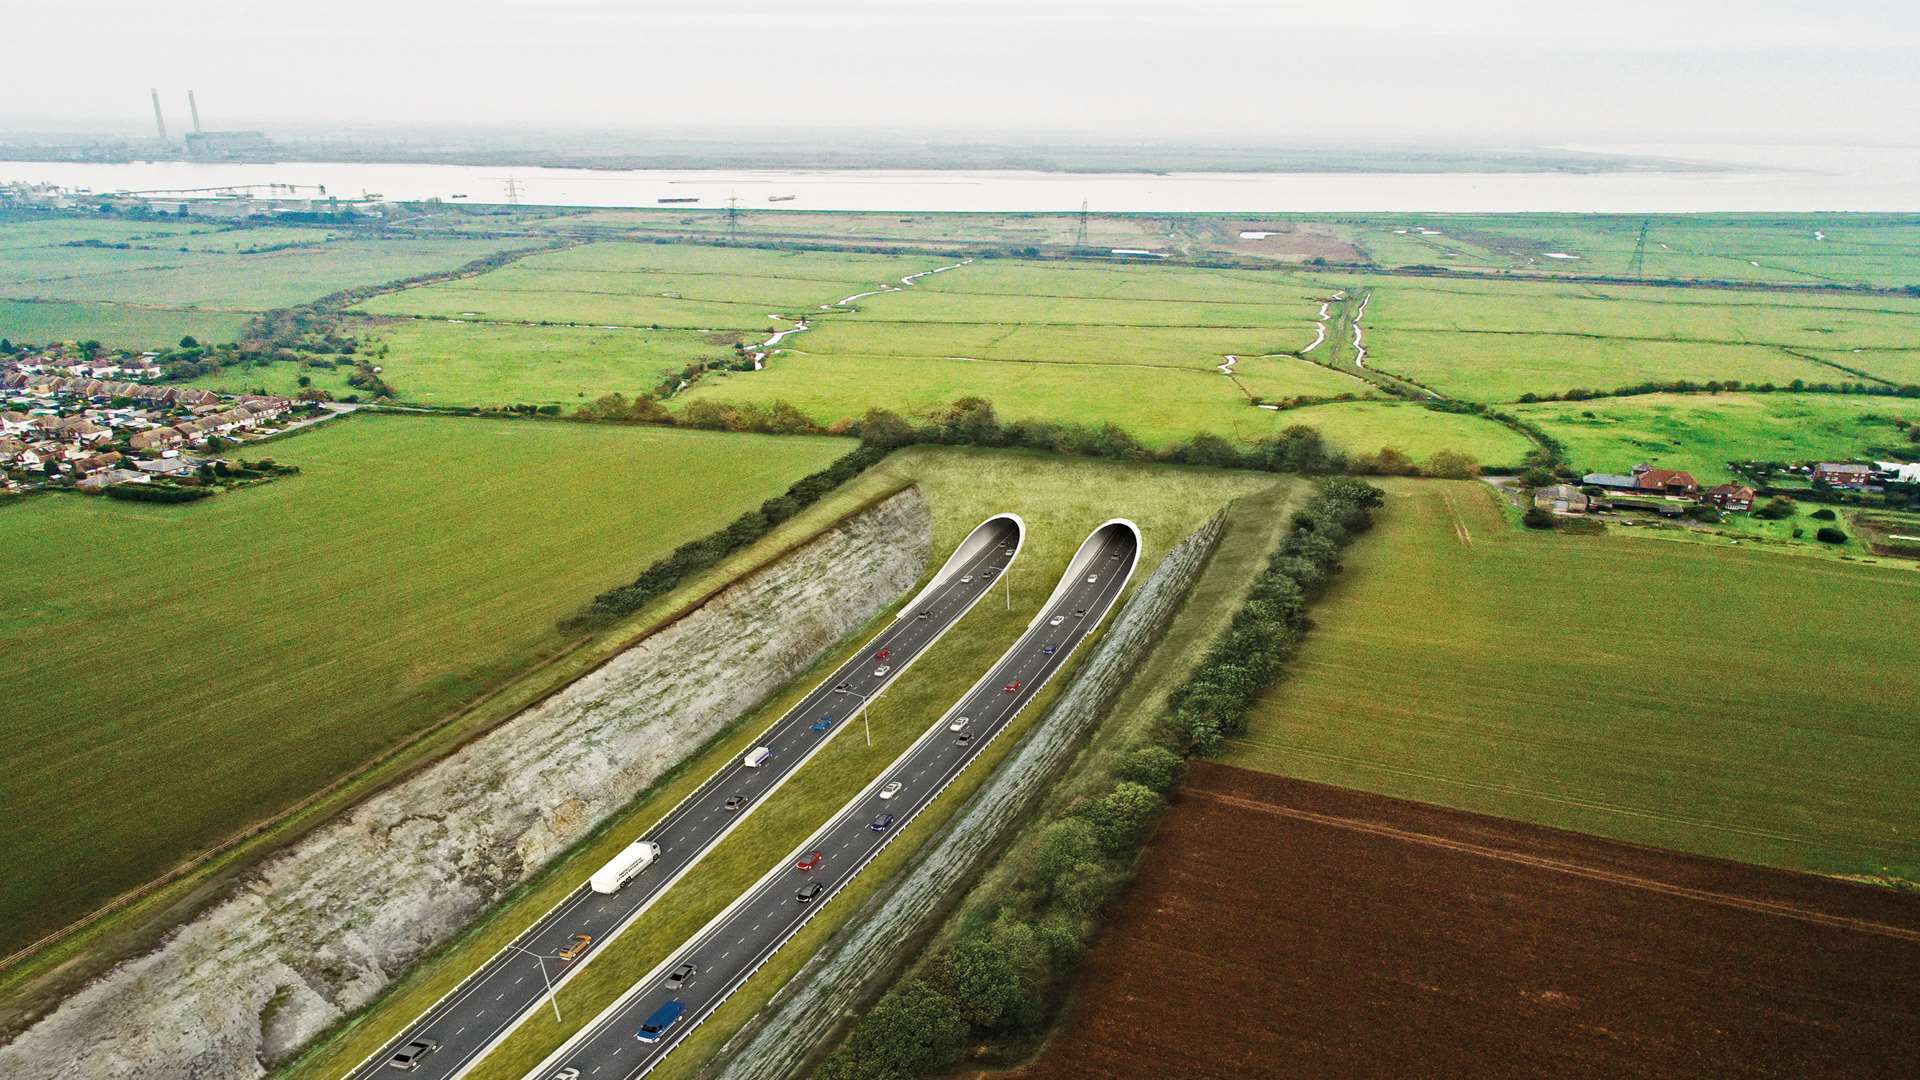 How the proposed Lower Thames Crossing will look, with a bored tunnel between the villages of Chalk and Shorne to Essex